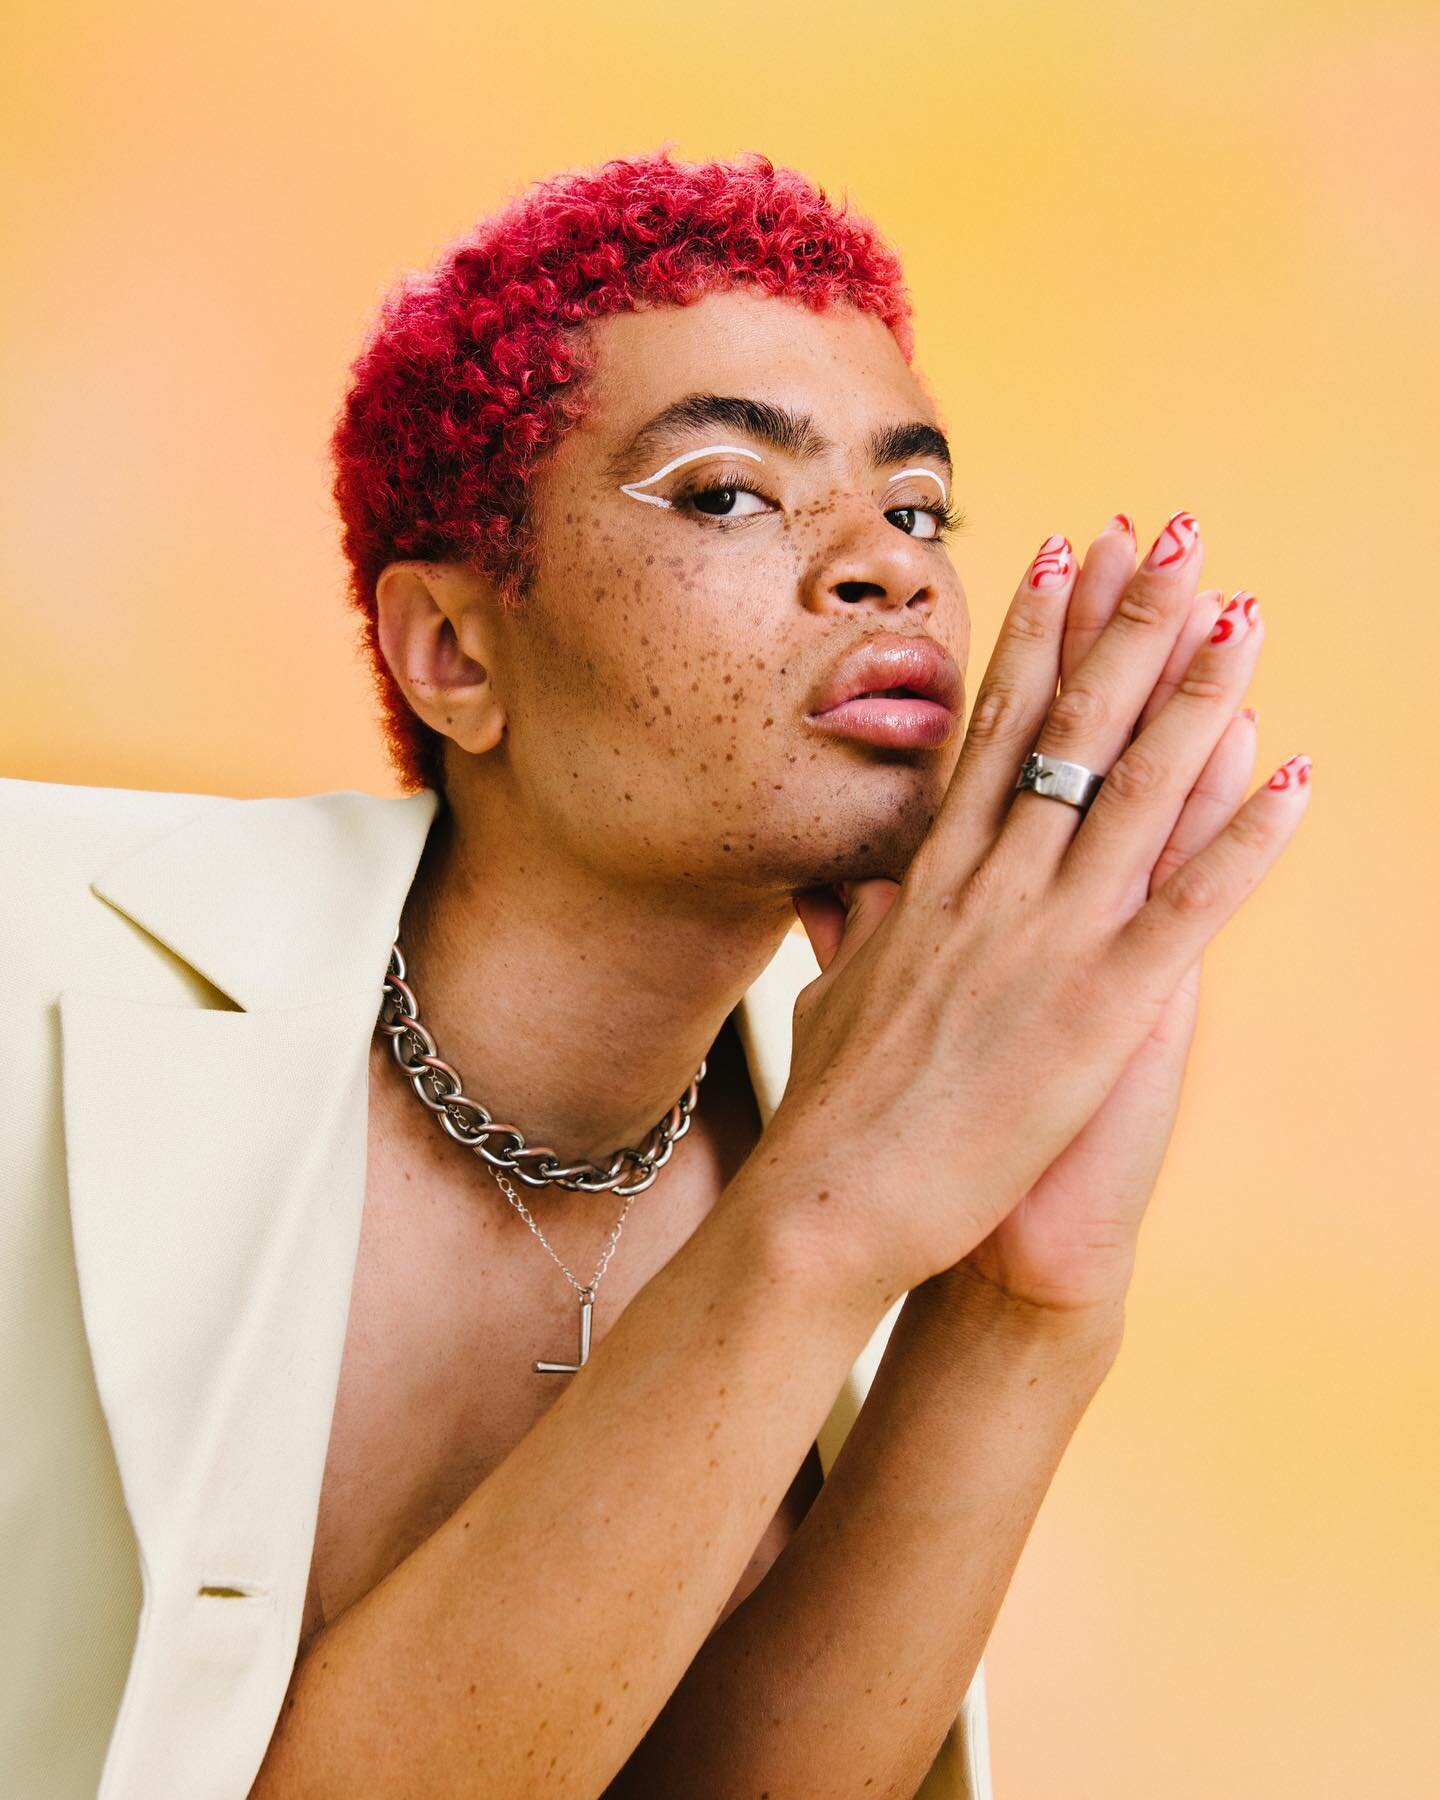 @lookatmyfrecklz in Undertones!! 

Shaheem Anderson (they/them)
Shaheem is a free spirit who transcends the way society expects them to live their life. At their core, self-love prevails and allows them to rise above anyone else&rsquo;s opinion or ex